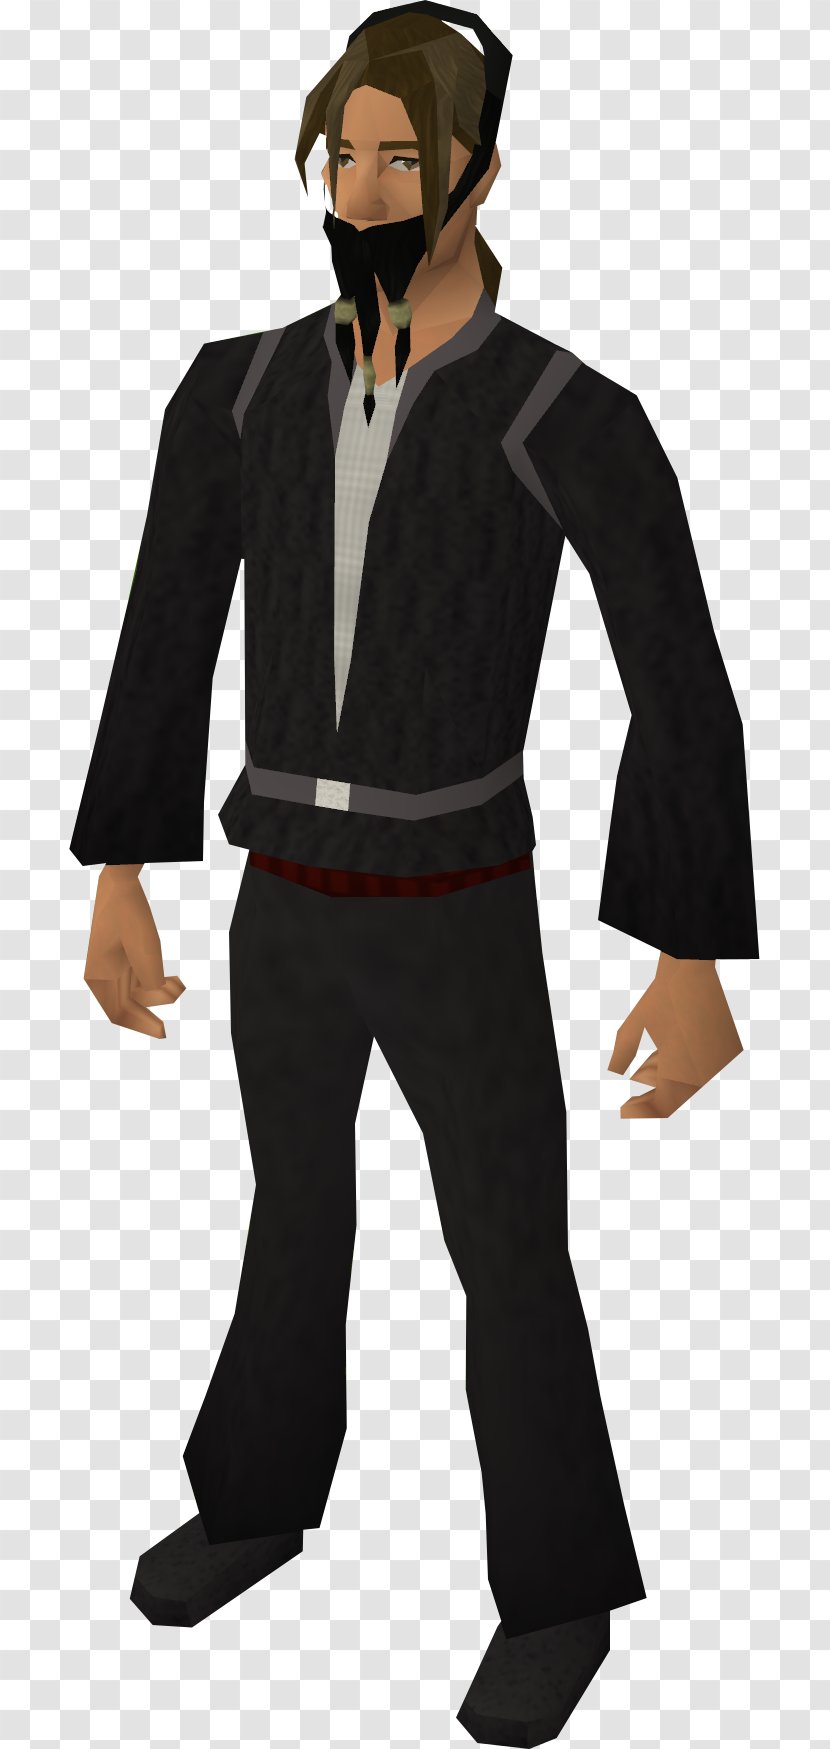 Old School RuneScape Wikia - Clothing - Piratebeard Transparent PNG